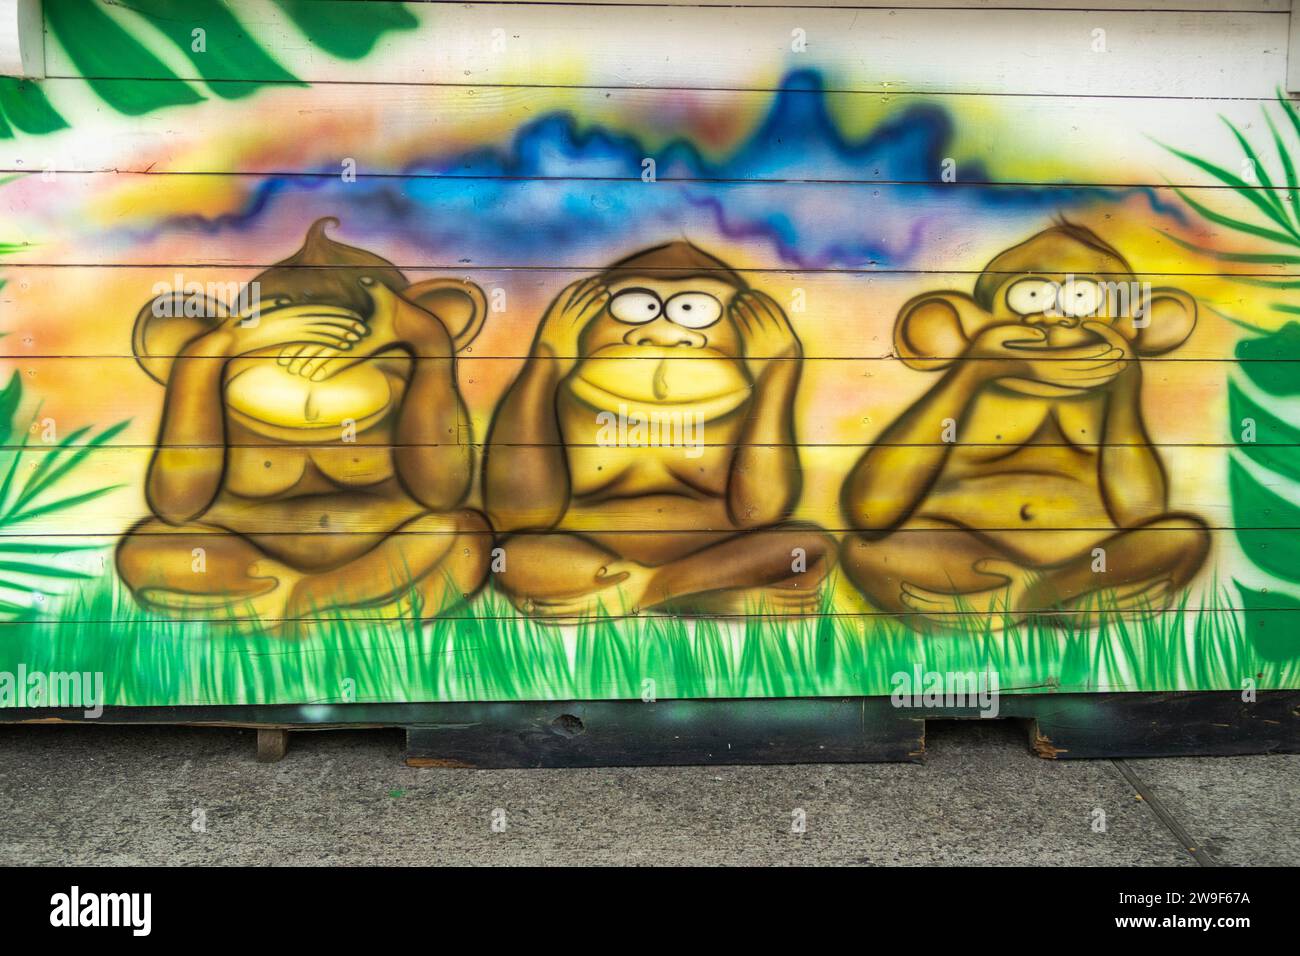 Three wise monkeys, see no evil, hear no evil, speak no evil, monkeys, covering his eyes, covering his ears, covering his mouth, selfishness, coward. Stock Photo